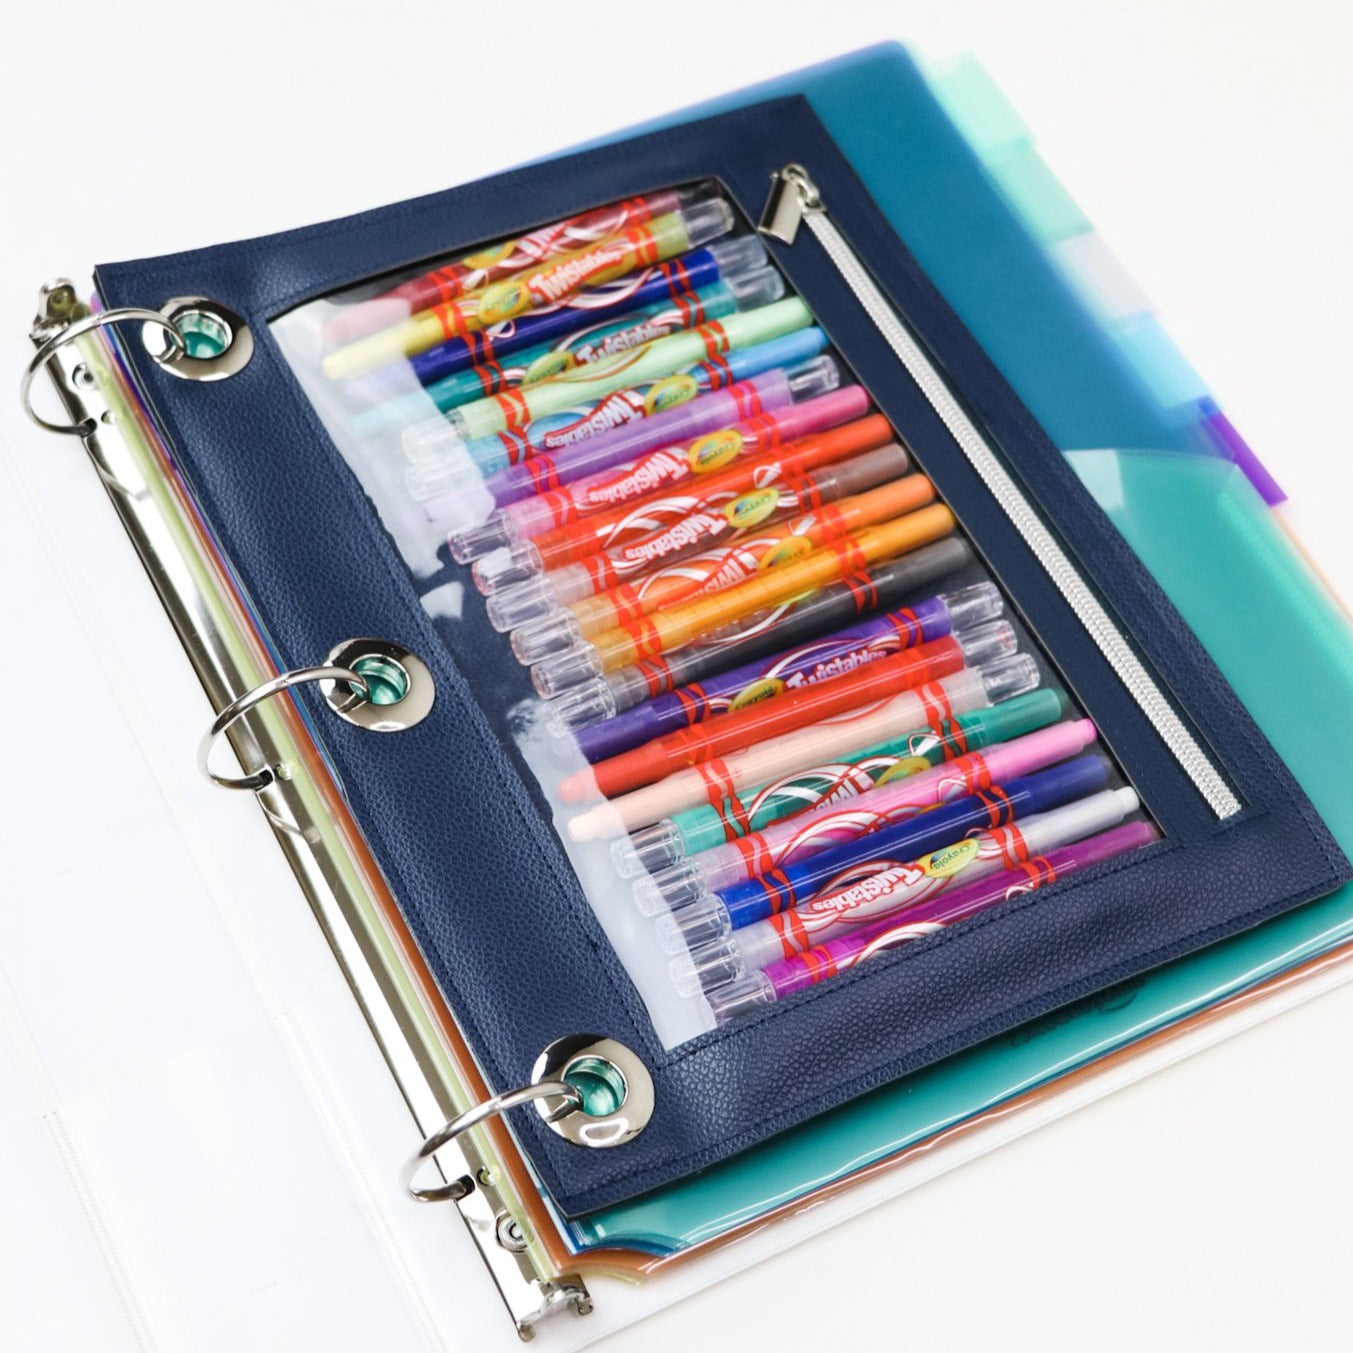 Free! Binder Pouch Instant Download